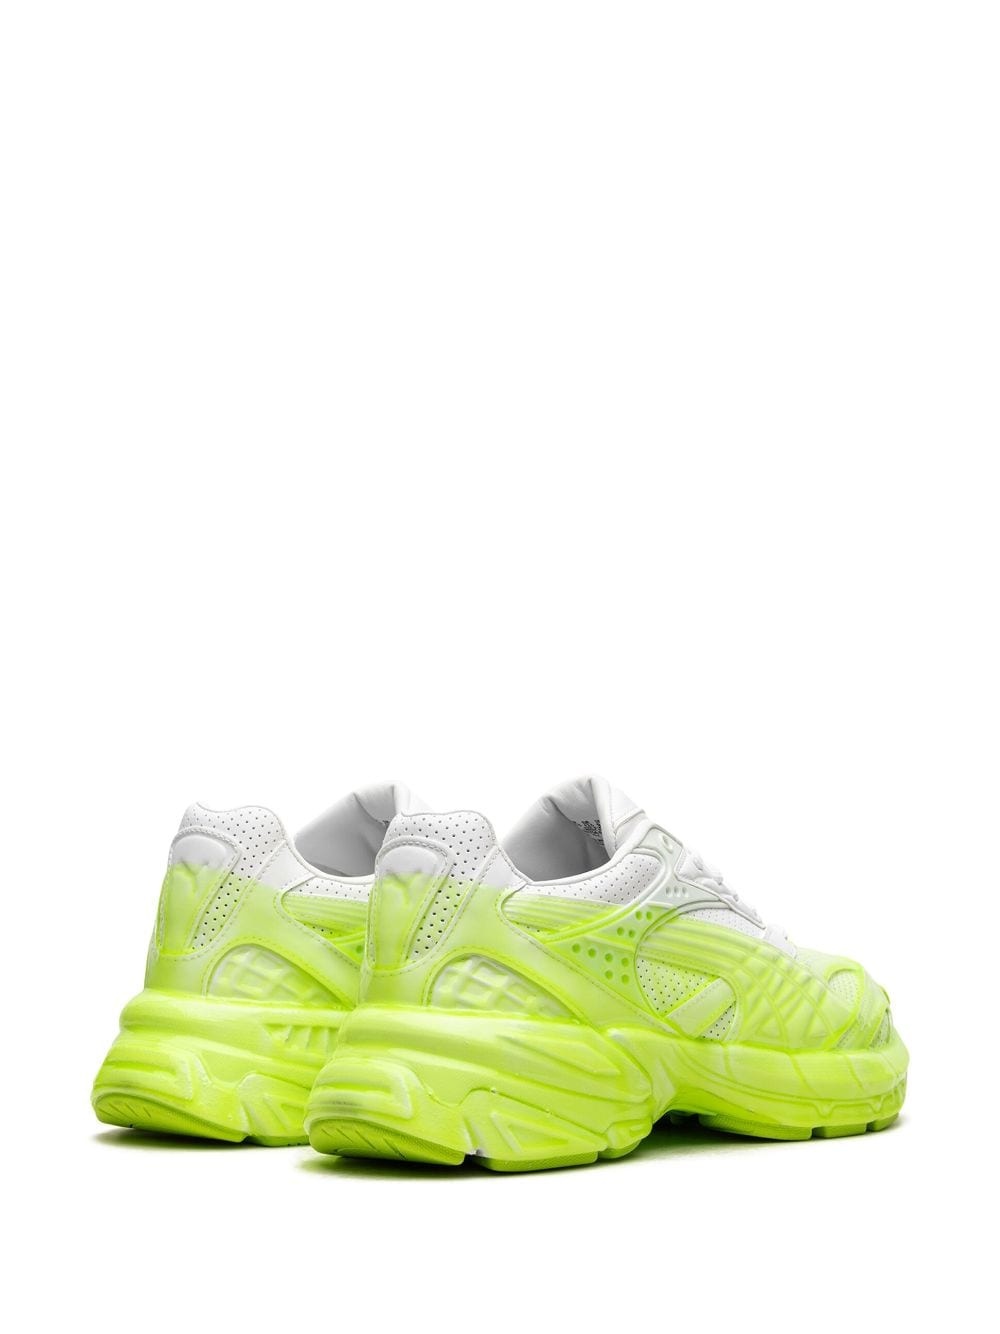 Velophasis Slime "Puma White/Pro Green" sneakers - 3